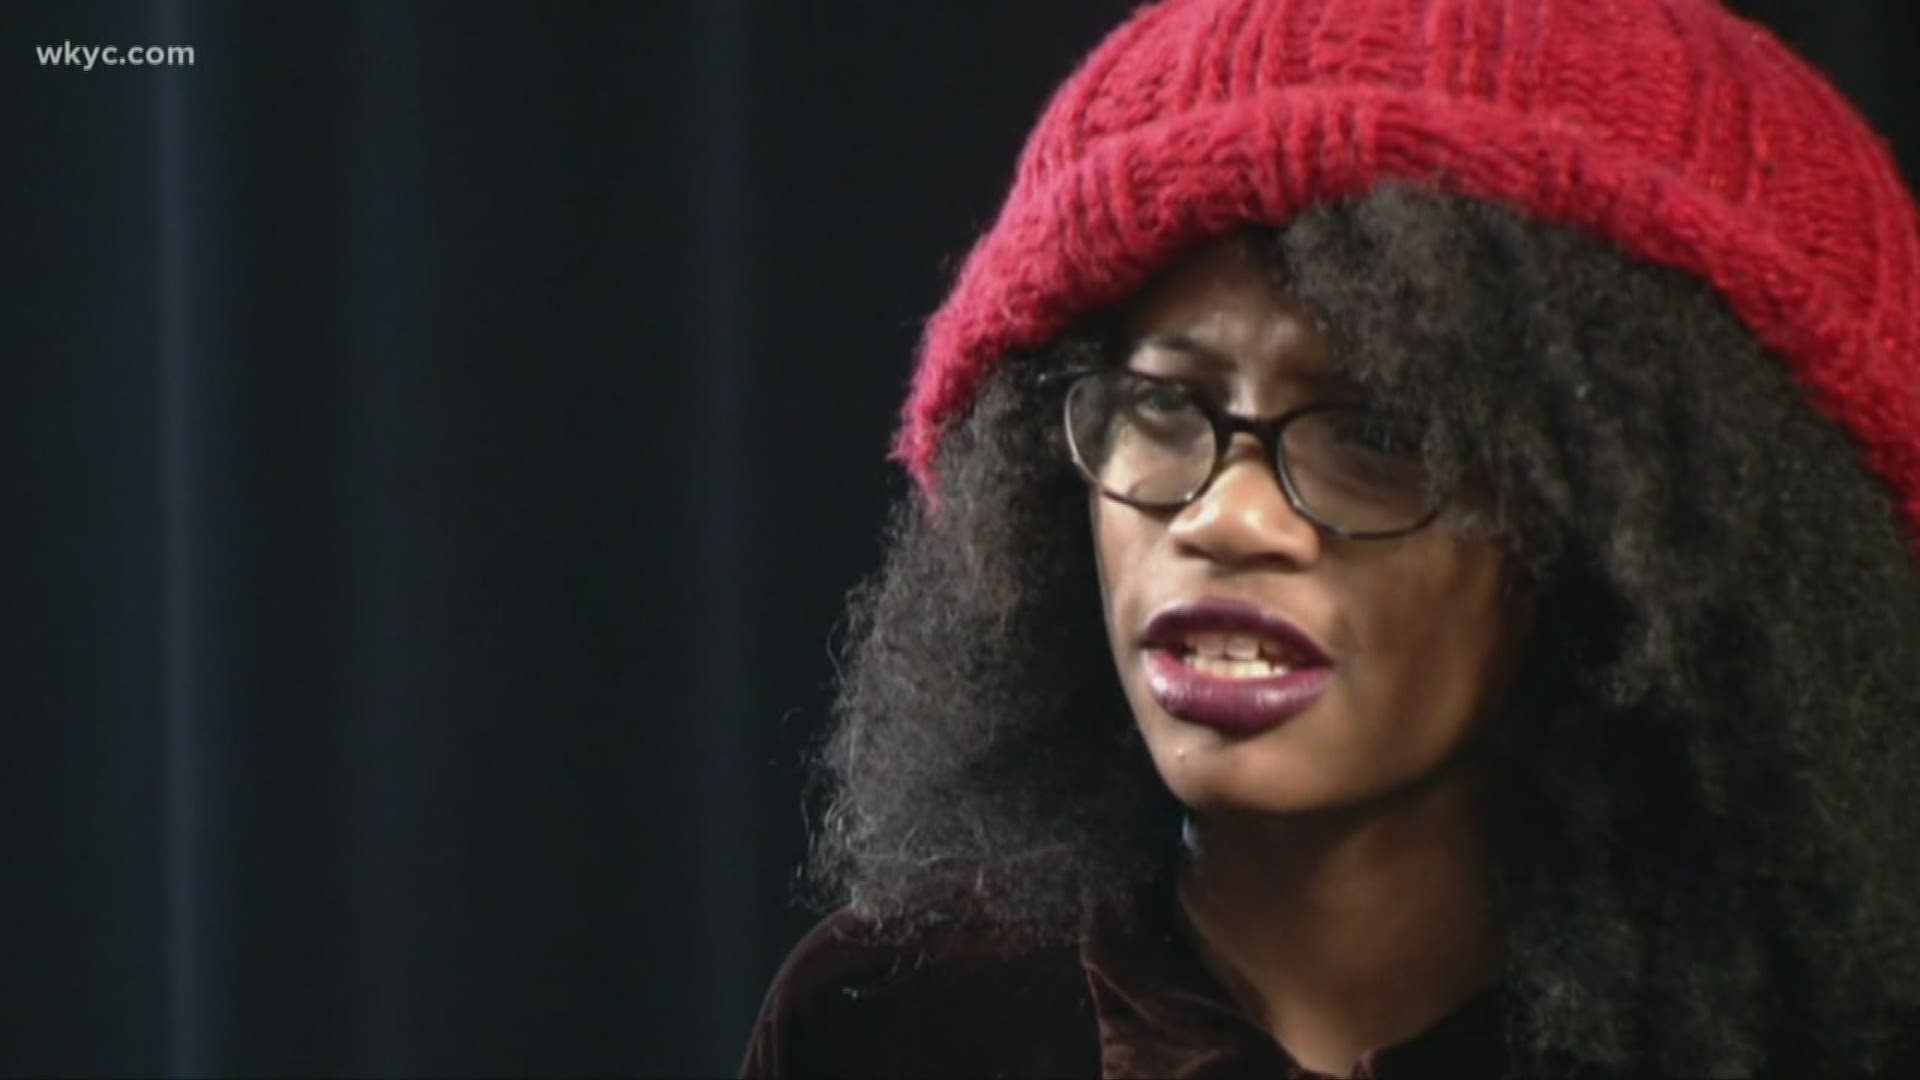 Raja Belle Freeman has a powerful poem she wants you to experience. 'Never Have I Ever' is her work that takes a strong stance on social injustice.